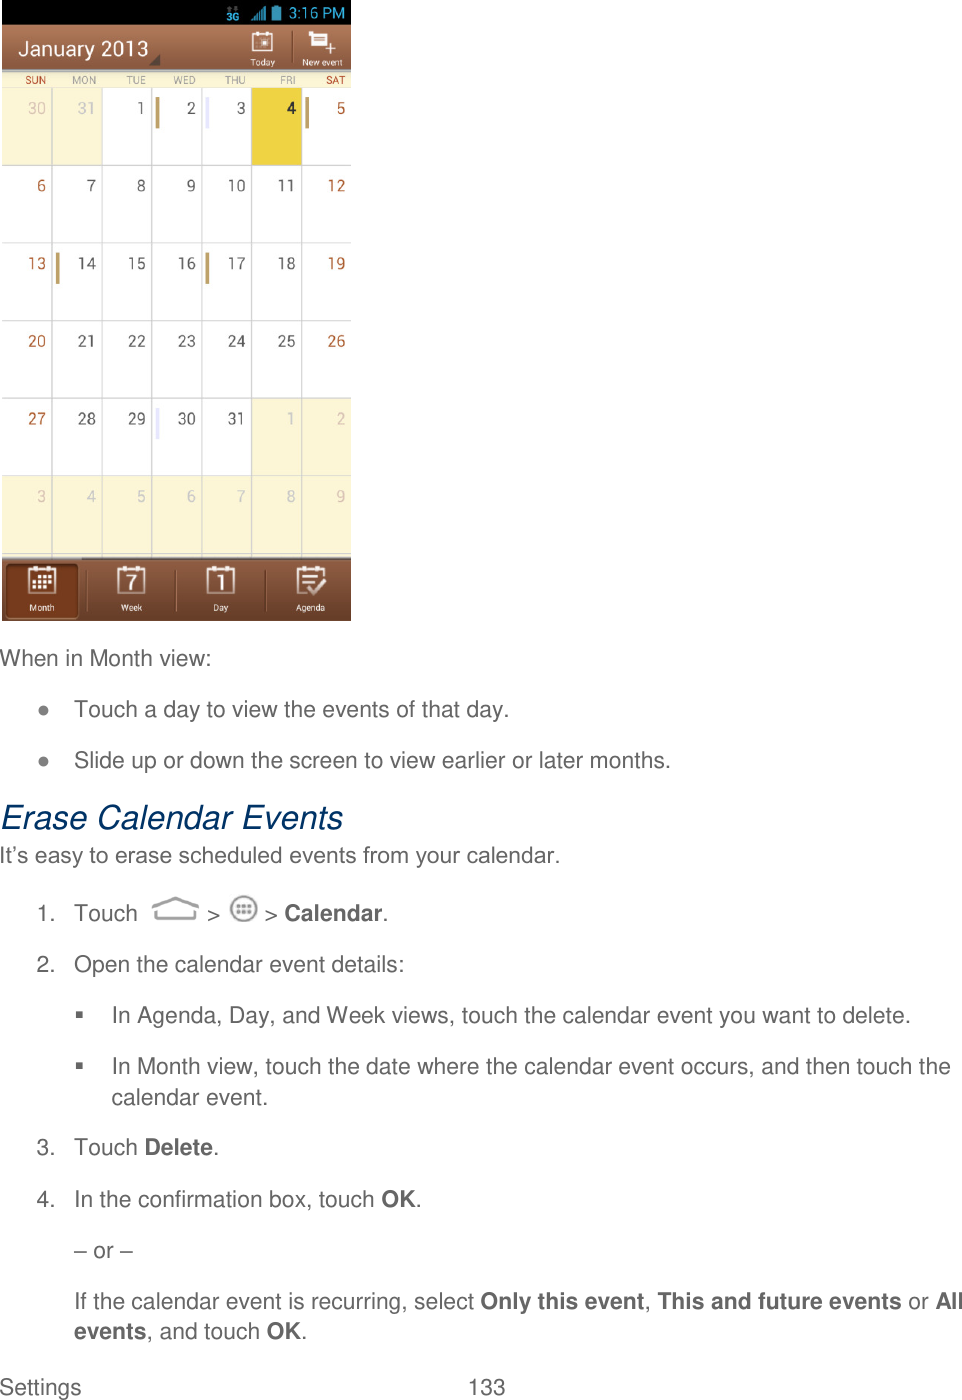 Settings    133  When in Month view: ● Touch a day to view the events of that day. ● Slide up or down the screen to view earlier or later months. Erase Calendar Events It‟s easy to erase scheduled events from your calendar. 1.  Touch   &gt;   &gt; Calendar. 2.  Open the calendar event details:   In Agenda, Day, and Week views, touch the calendar event you want to delete.   In Month view, touch the date where the calendar event occurs, and then touch the calendar event. 3.  Touch Delete.  4.  In the confirmation box, touch OK. – or – If the calendar event is recurring, select Only this event, This and future events or All events, and touch OK. 